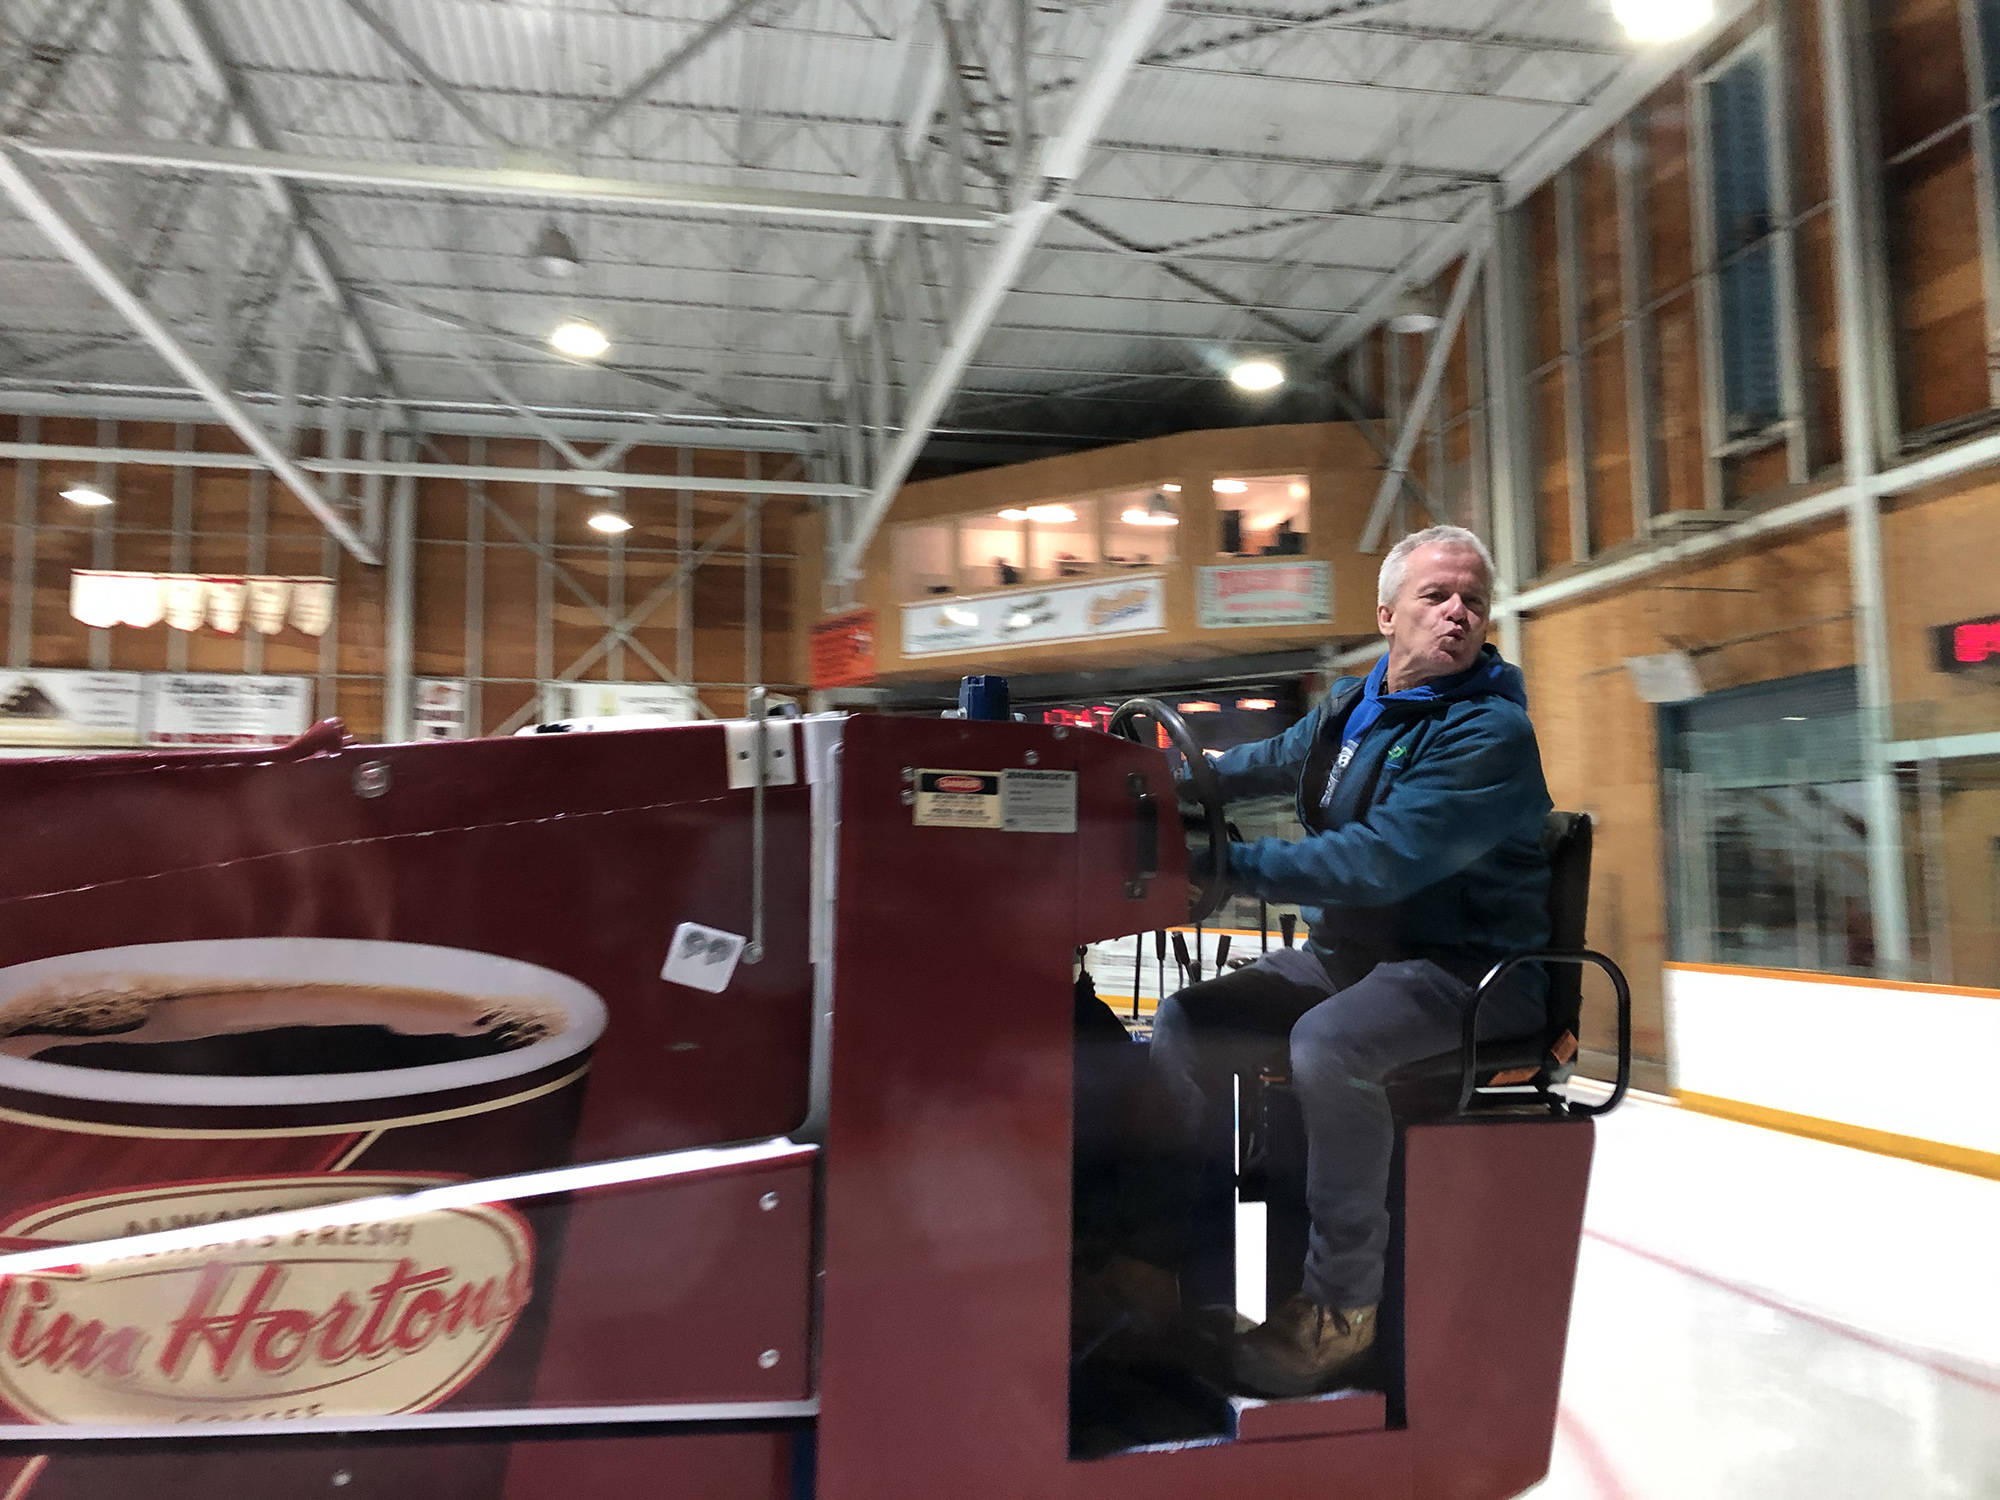 Golden’s Zamboni driver Robert Drummond blows a kiss to the fans as he cleans the ice between periods of the Rockets games. He has become known for his performances while he operates the Zamboni. (Claire Palmer photo)